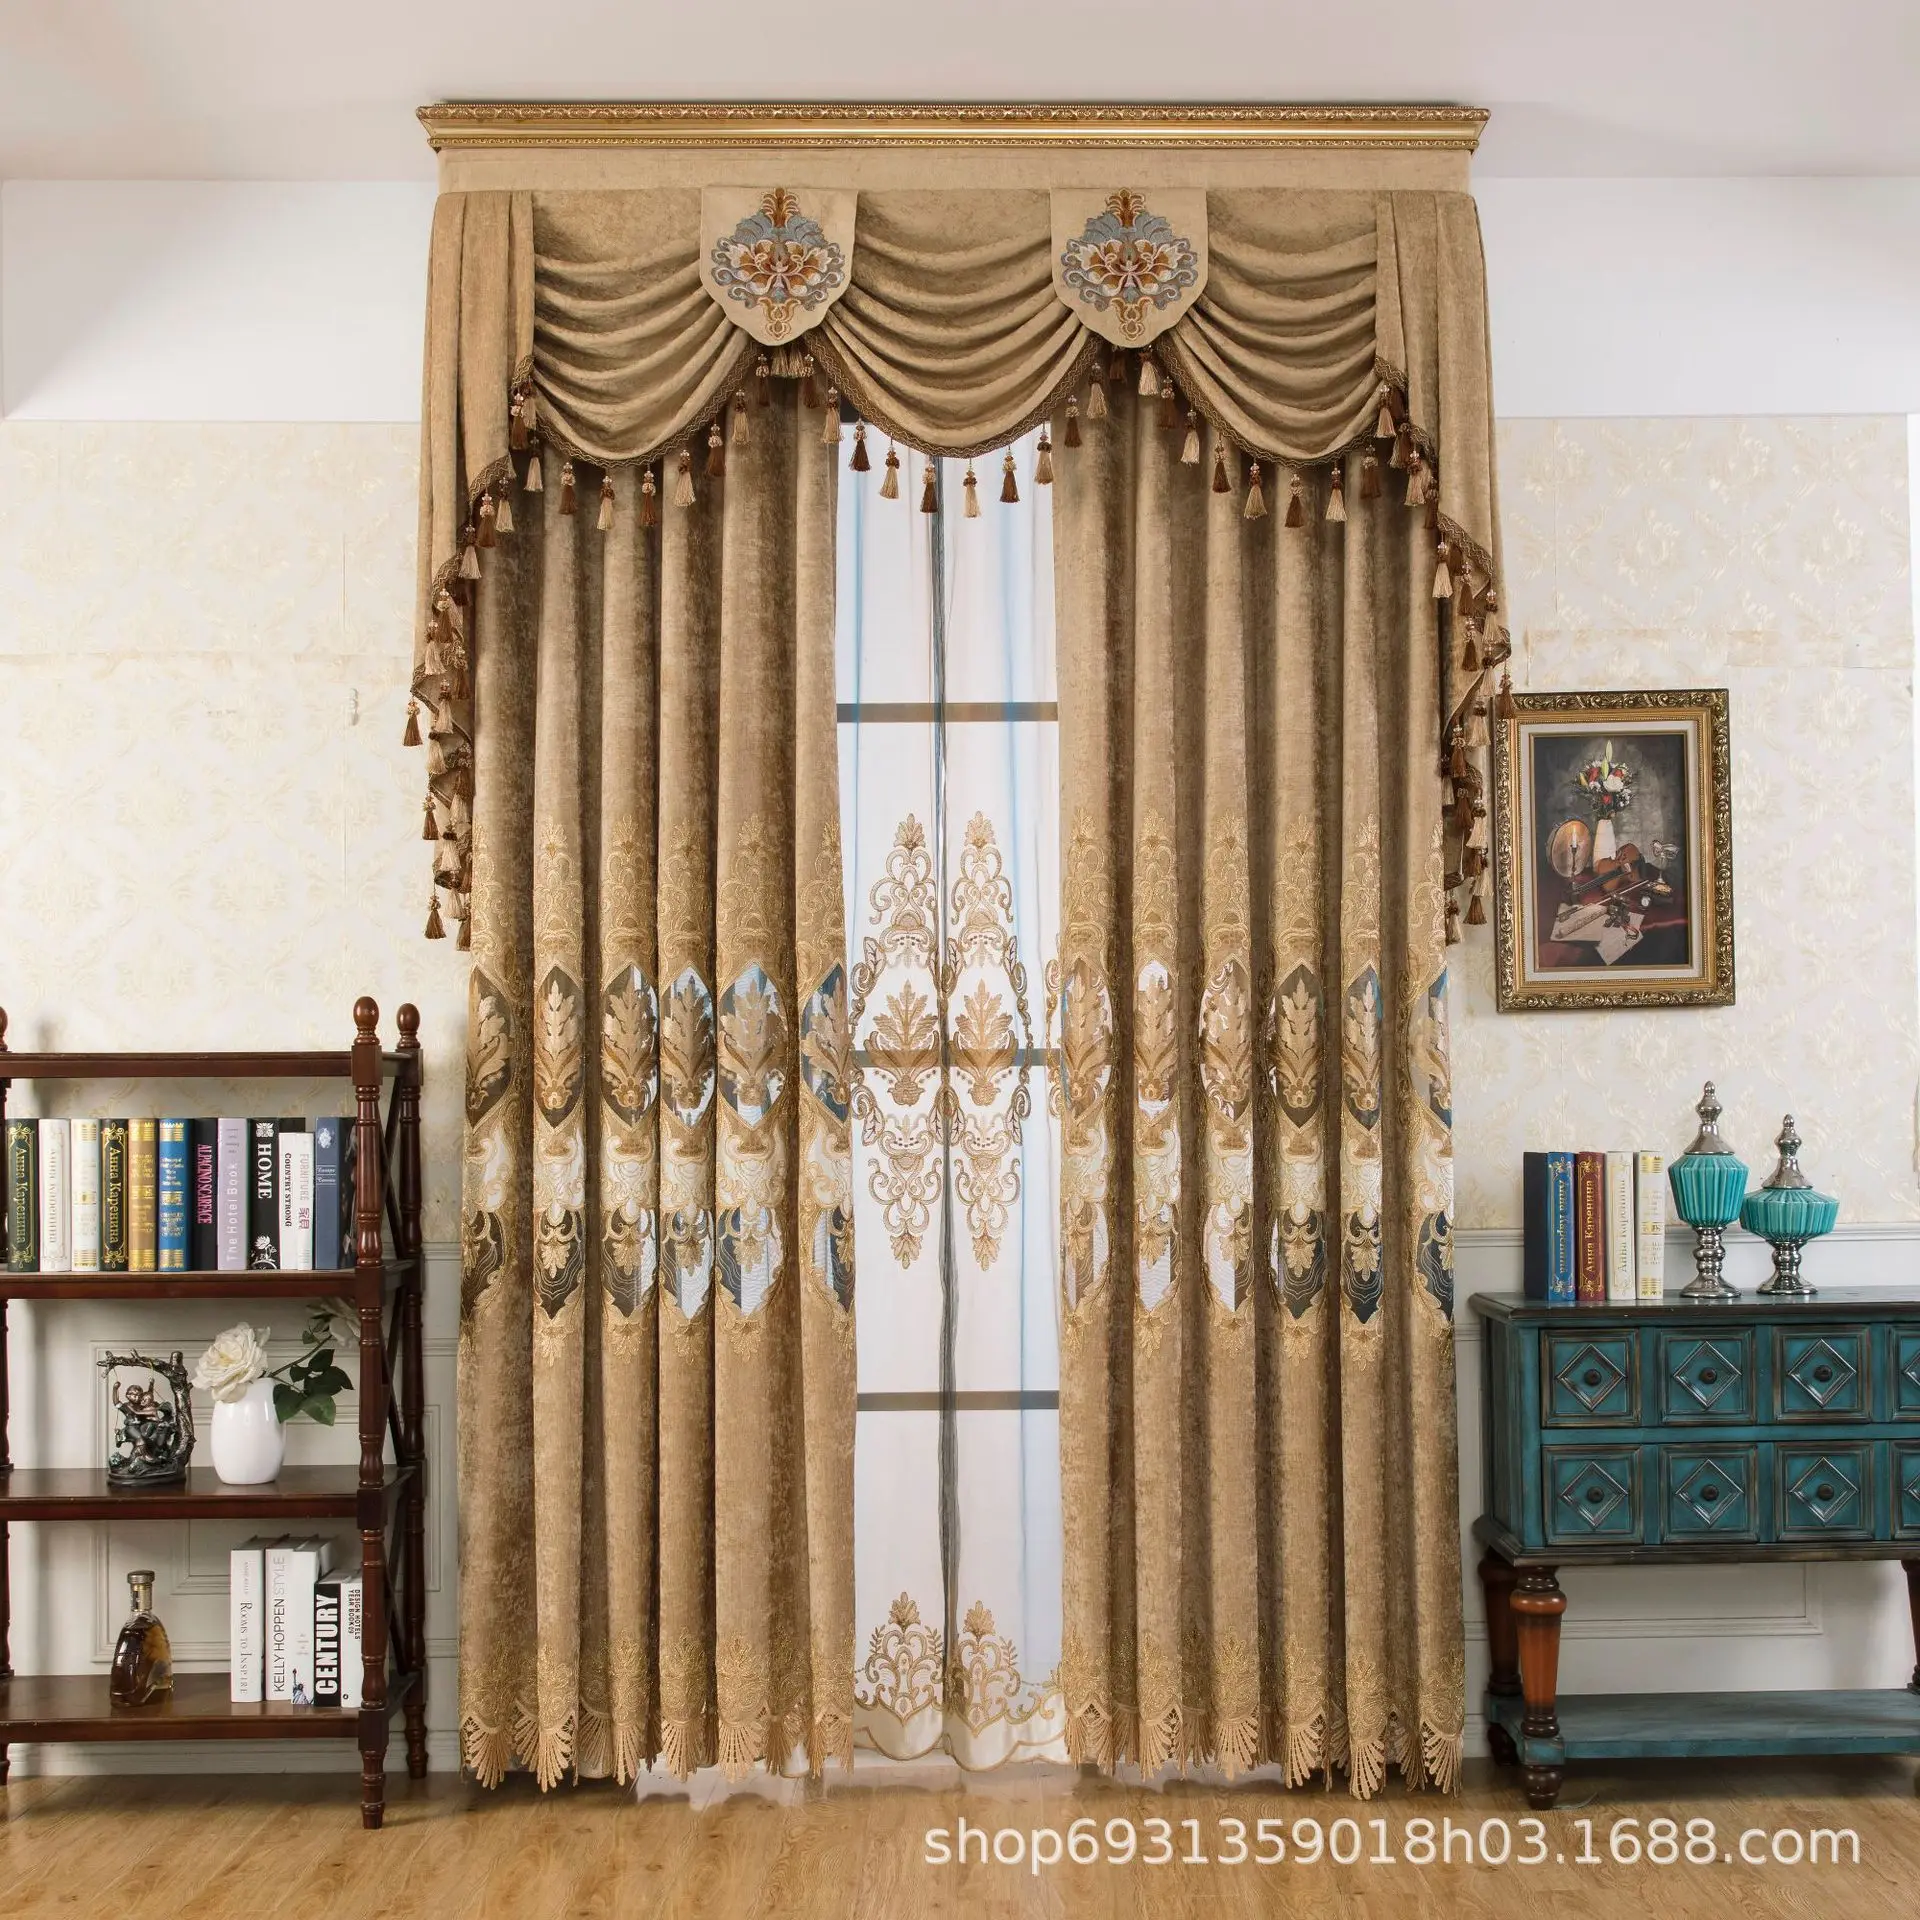 

Custom Europea water-soluble hollow embroidery living room chenille coffee cloth blackout curtain tulle valance drape C1814